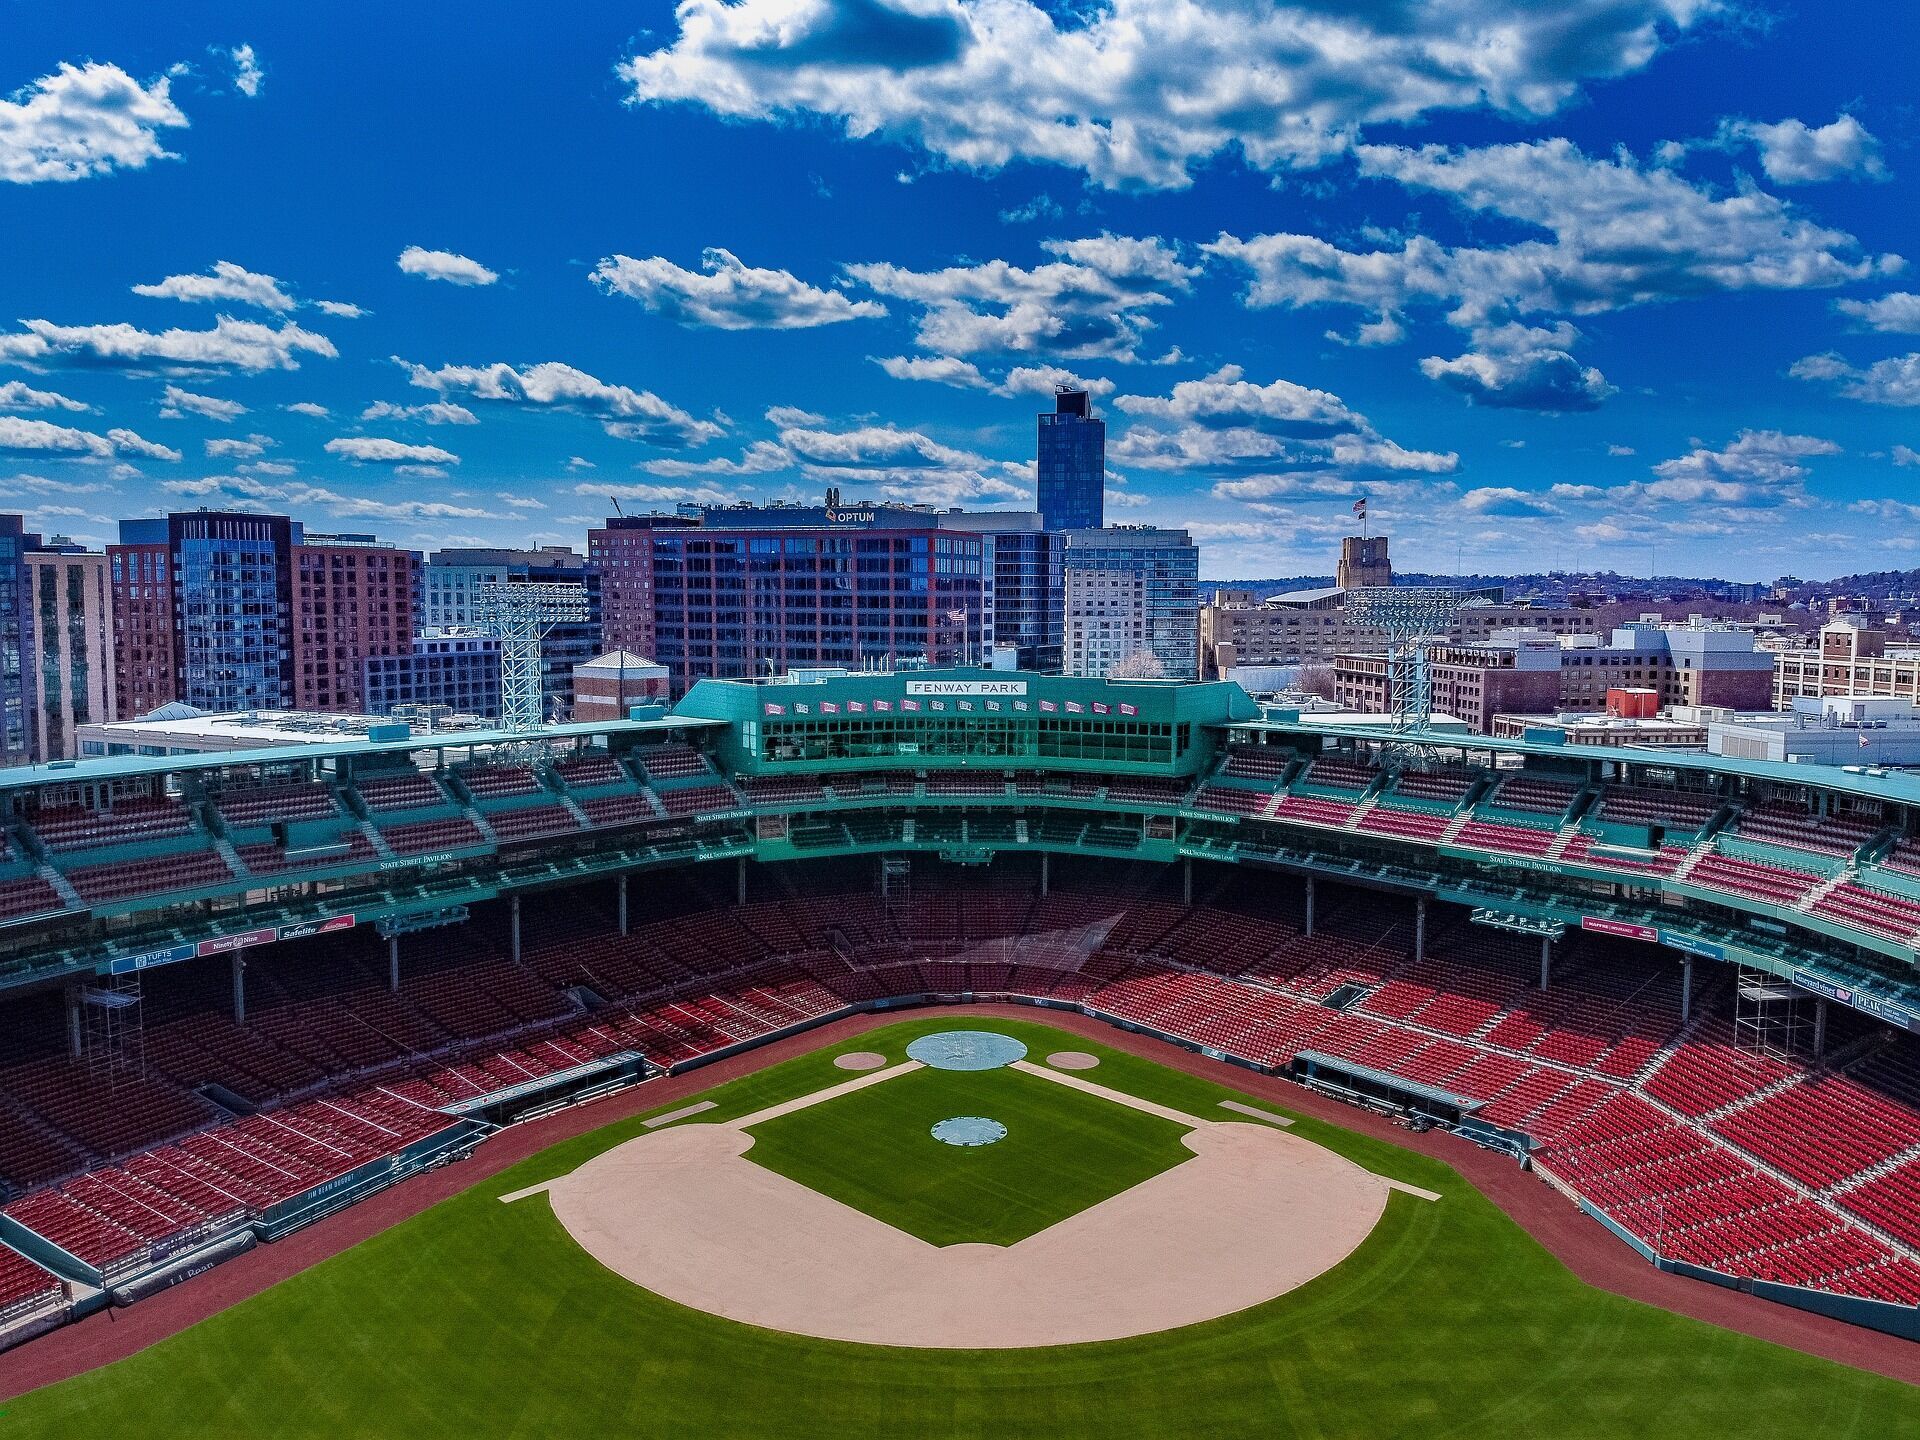 Low prices and great weather: the best time to visit Boston